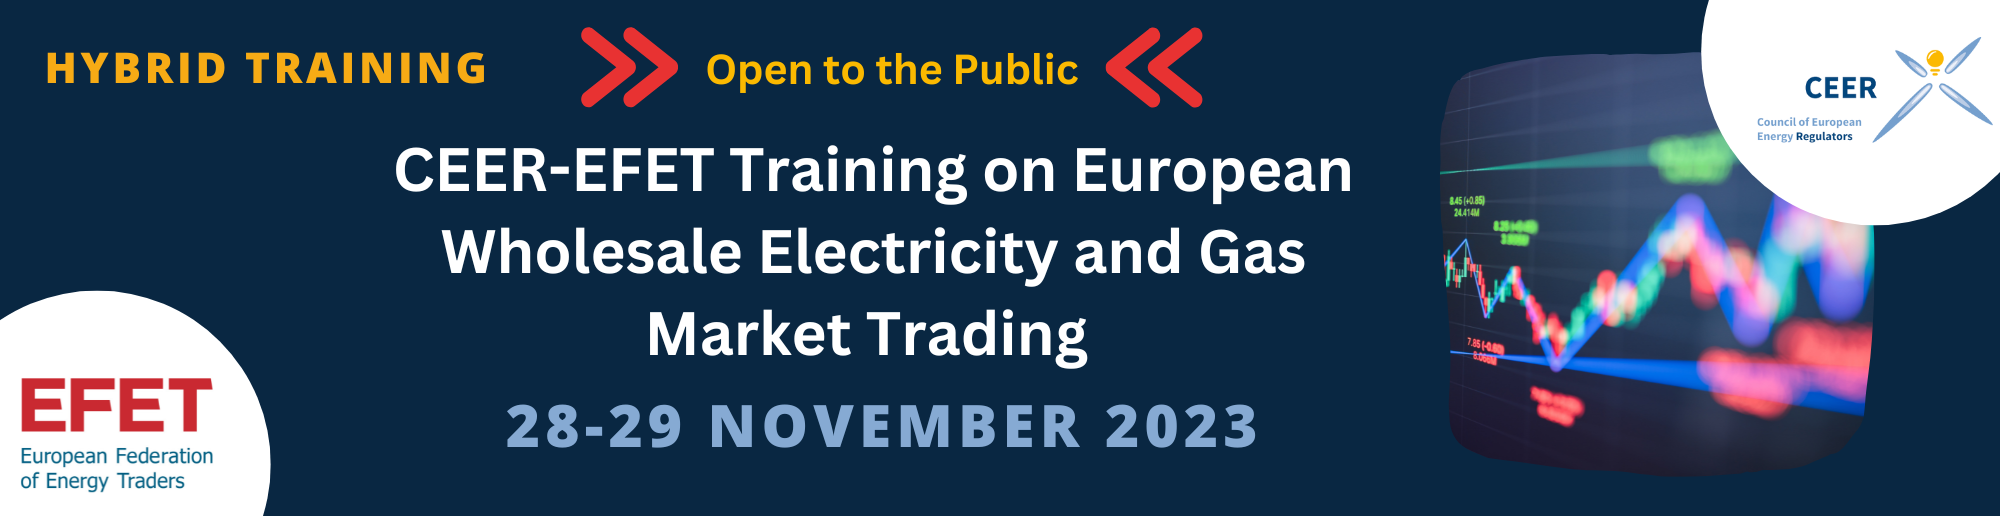 CEER-EFET Training on European Wholesale Electricity and Gas Market Trading